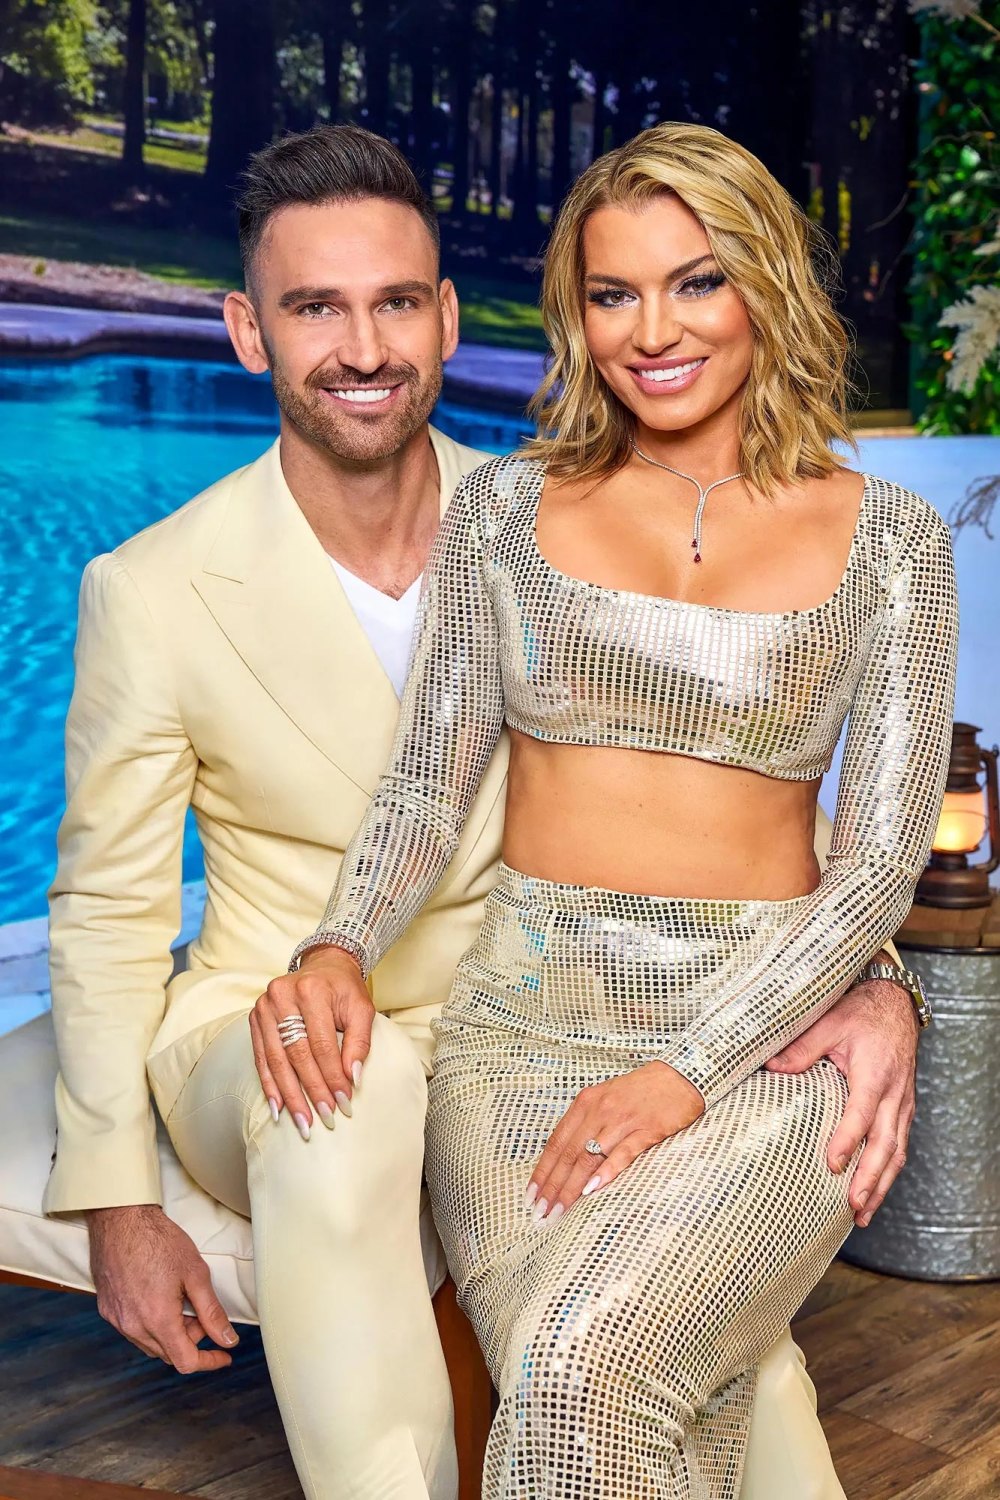 Lindsay and Carl Accuse Each Other of Lying in 'Summer House' Season 8 Reunion